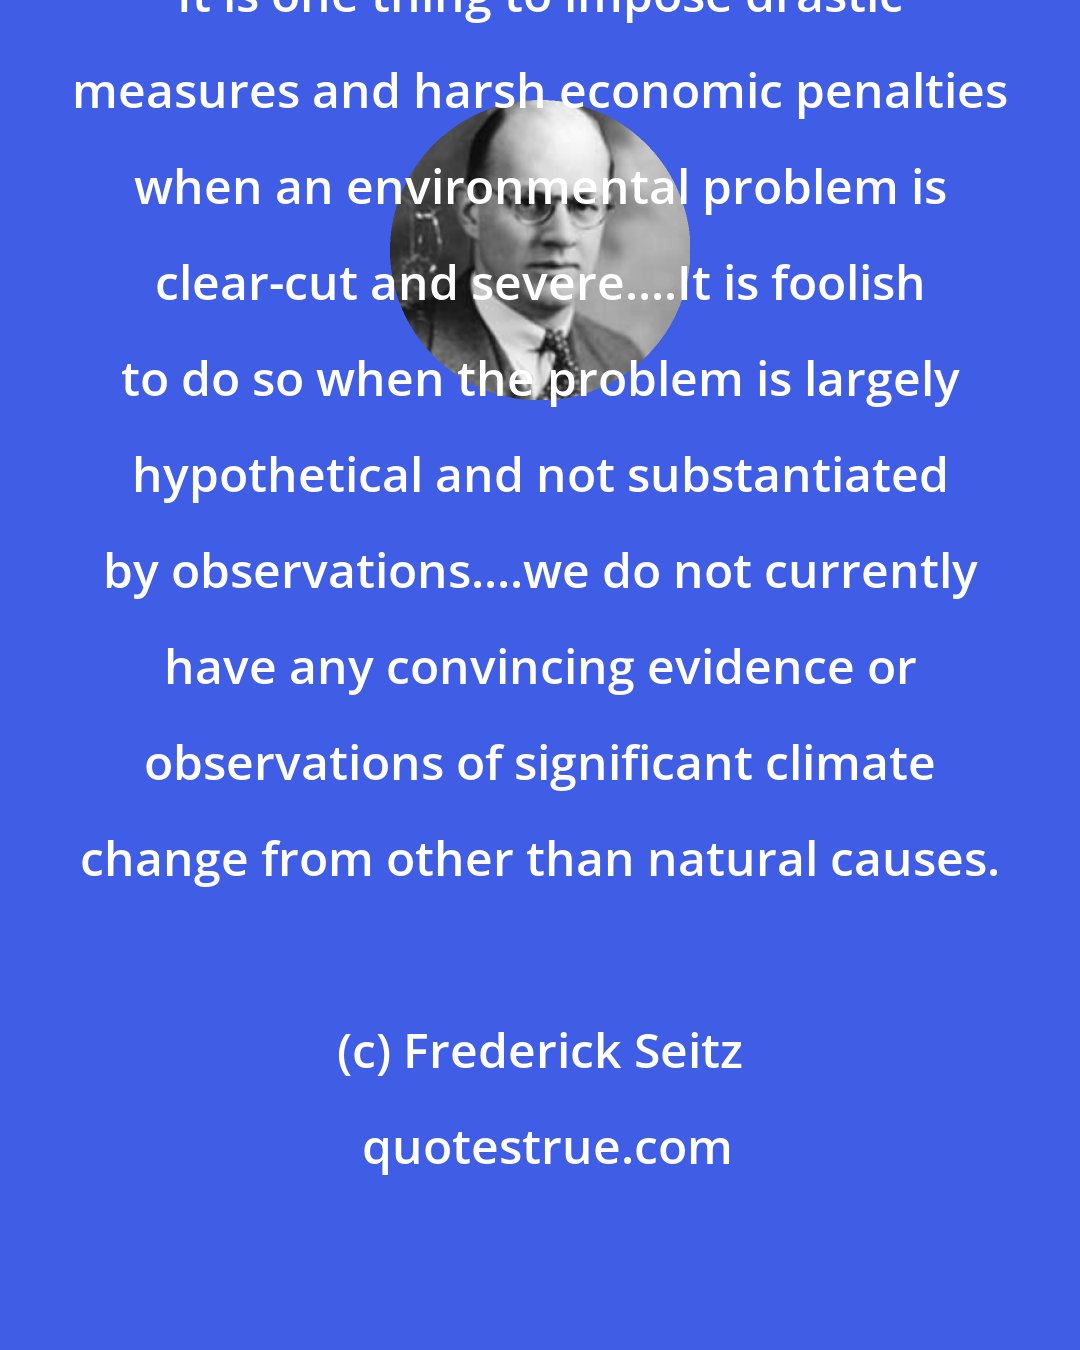 Frederick Seitz: It is one thing to impose drastic measures and harsh economic penalties when an environmental problem is clear-cut and severe....It is foolish to do so when the problem is largely hypothetical and not substantiated by observations....we do not currently have any convincing evidence or observations of significant climate change from other than natural causes.